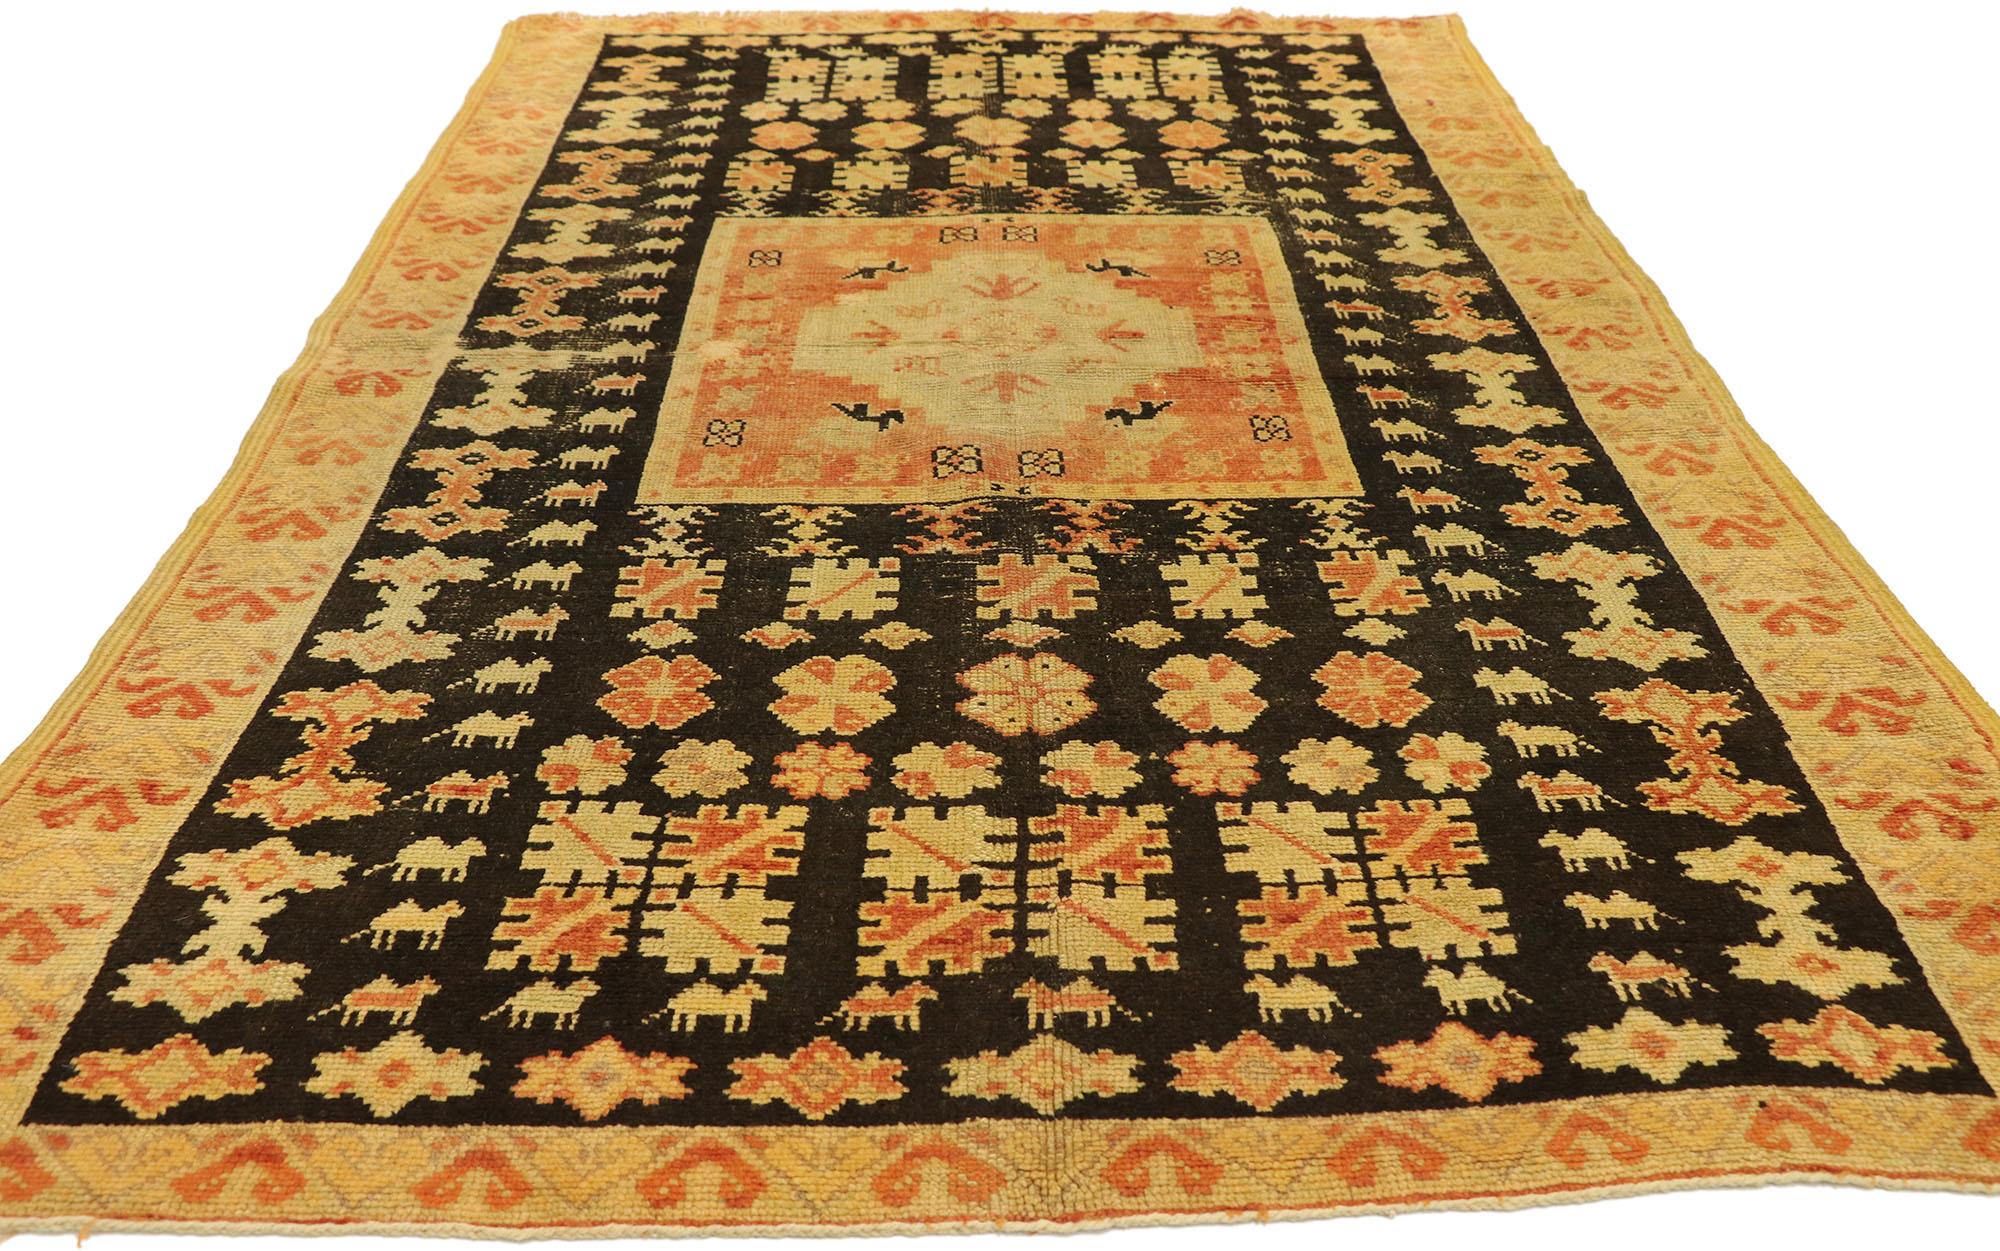 20187 Vintage Taznakht Moroccan Rug, 04'06 x 07'08. Taznakht rugs are a distinctive style of handwoven rug hailing from the Taznakht region nestled in the High Atlas Mountains of Morocco. Renowned for their vivid colors, intricate geometric designs,